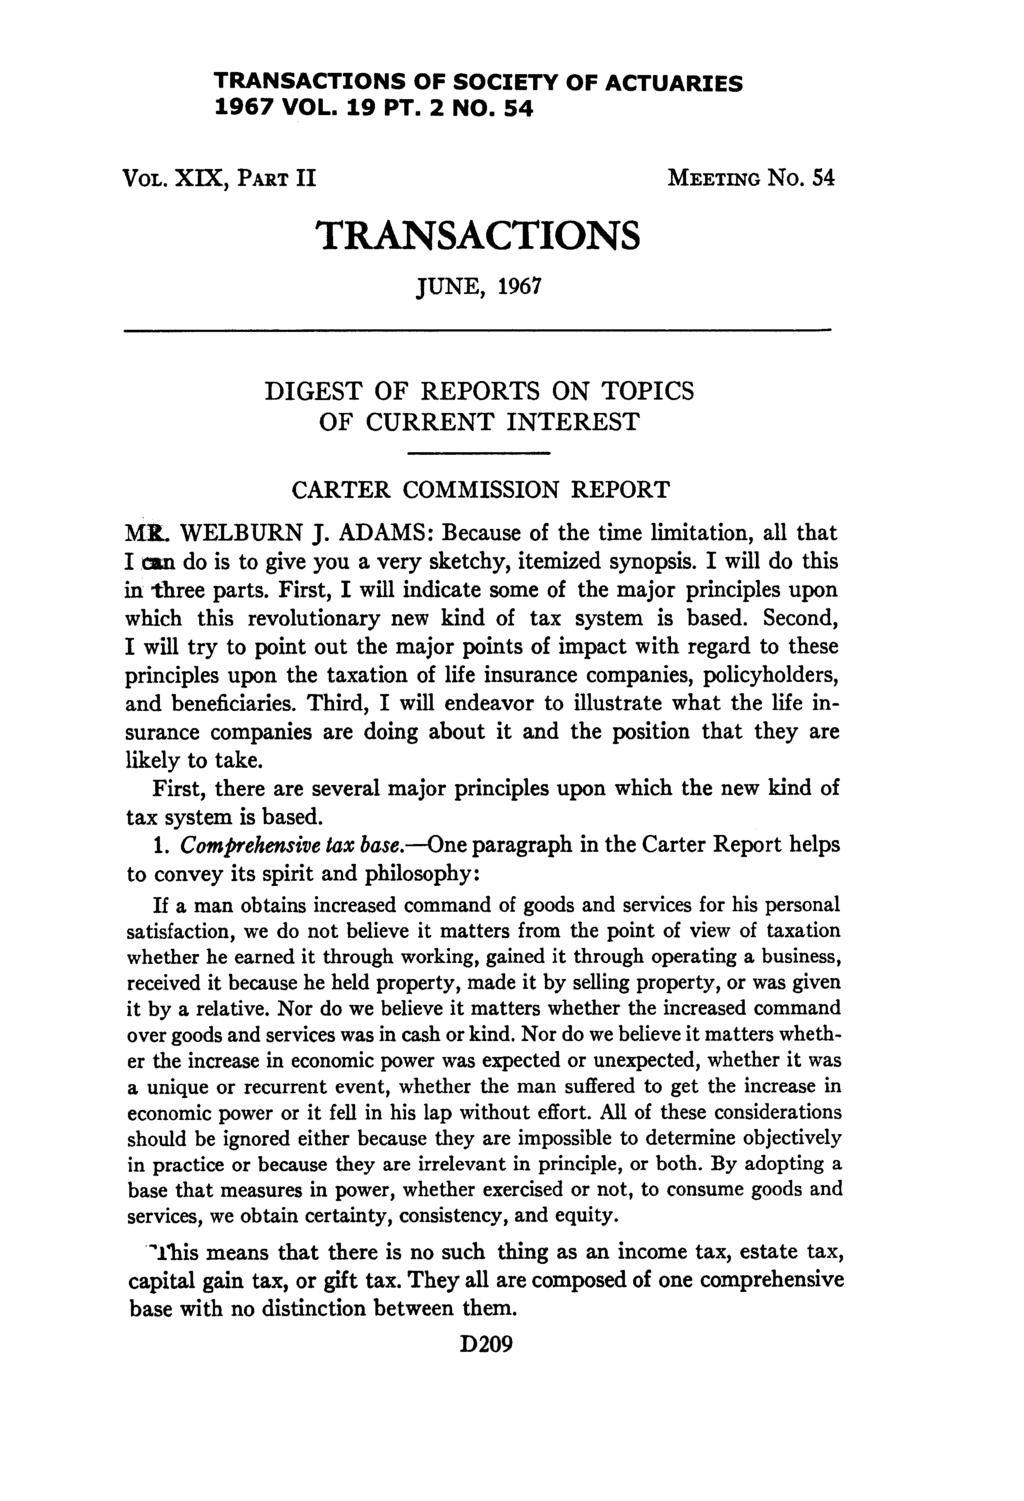 TRANSACTIONS OF SOCIETY OF ACTUARIES 1967 VOL. 19 PT. 2 NO. 54 VoL XIX, PART II TRANSACTIONS JUNE, 1957 MEETING No. 54 DIGEST OF REPORTS ON TOPICS OF CURRENT INTEREST CARTER COMMISSION REPORT MR.